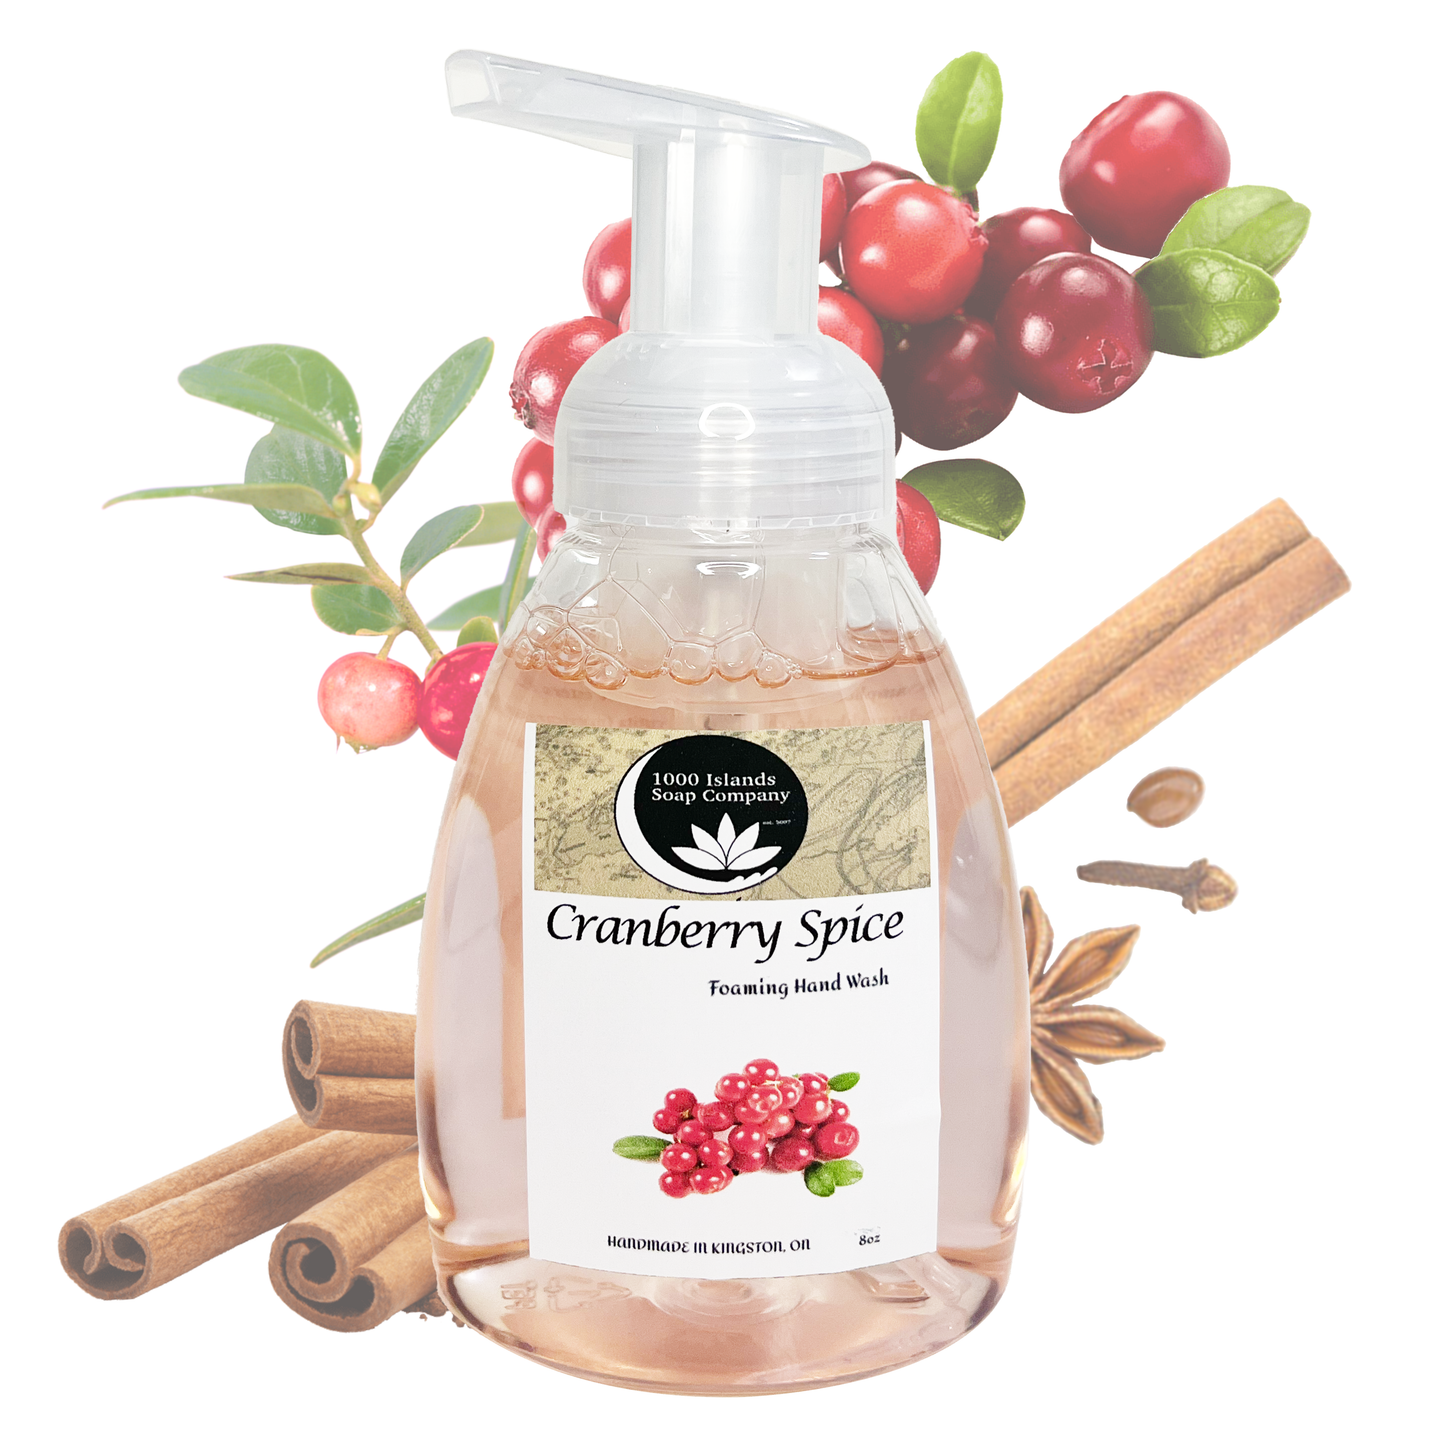 Cranberry Spice Foaming Hand Wash